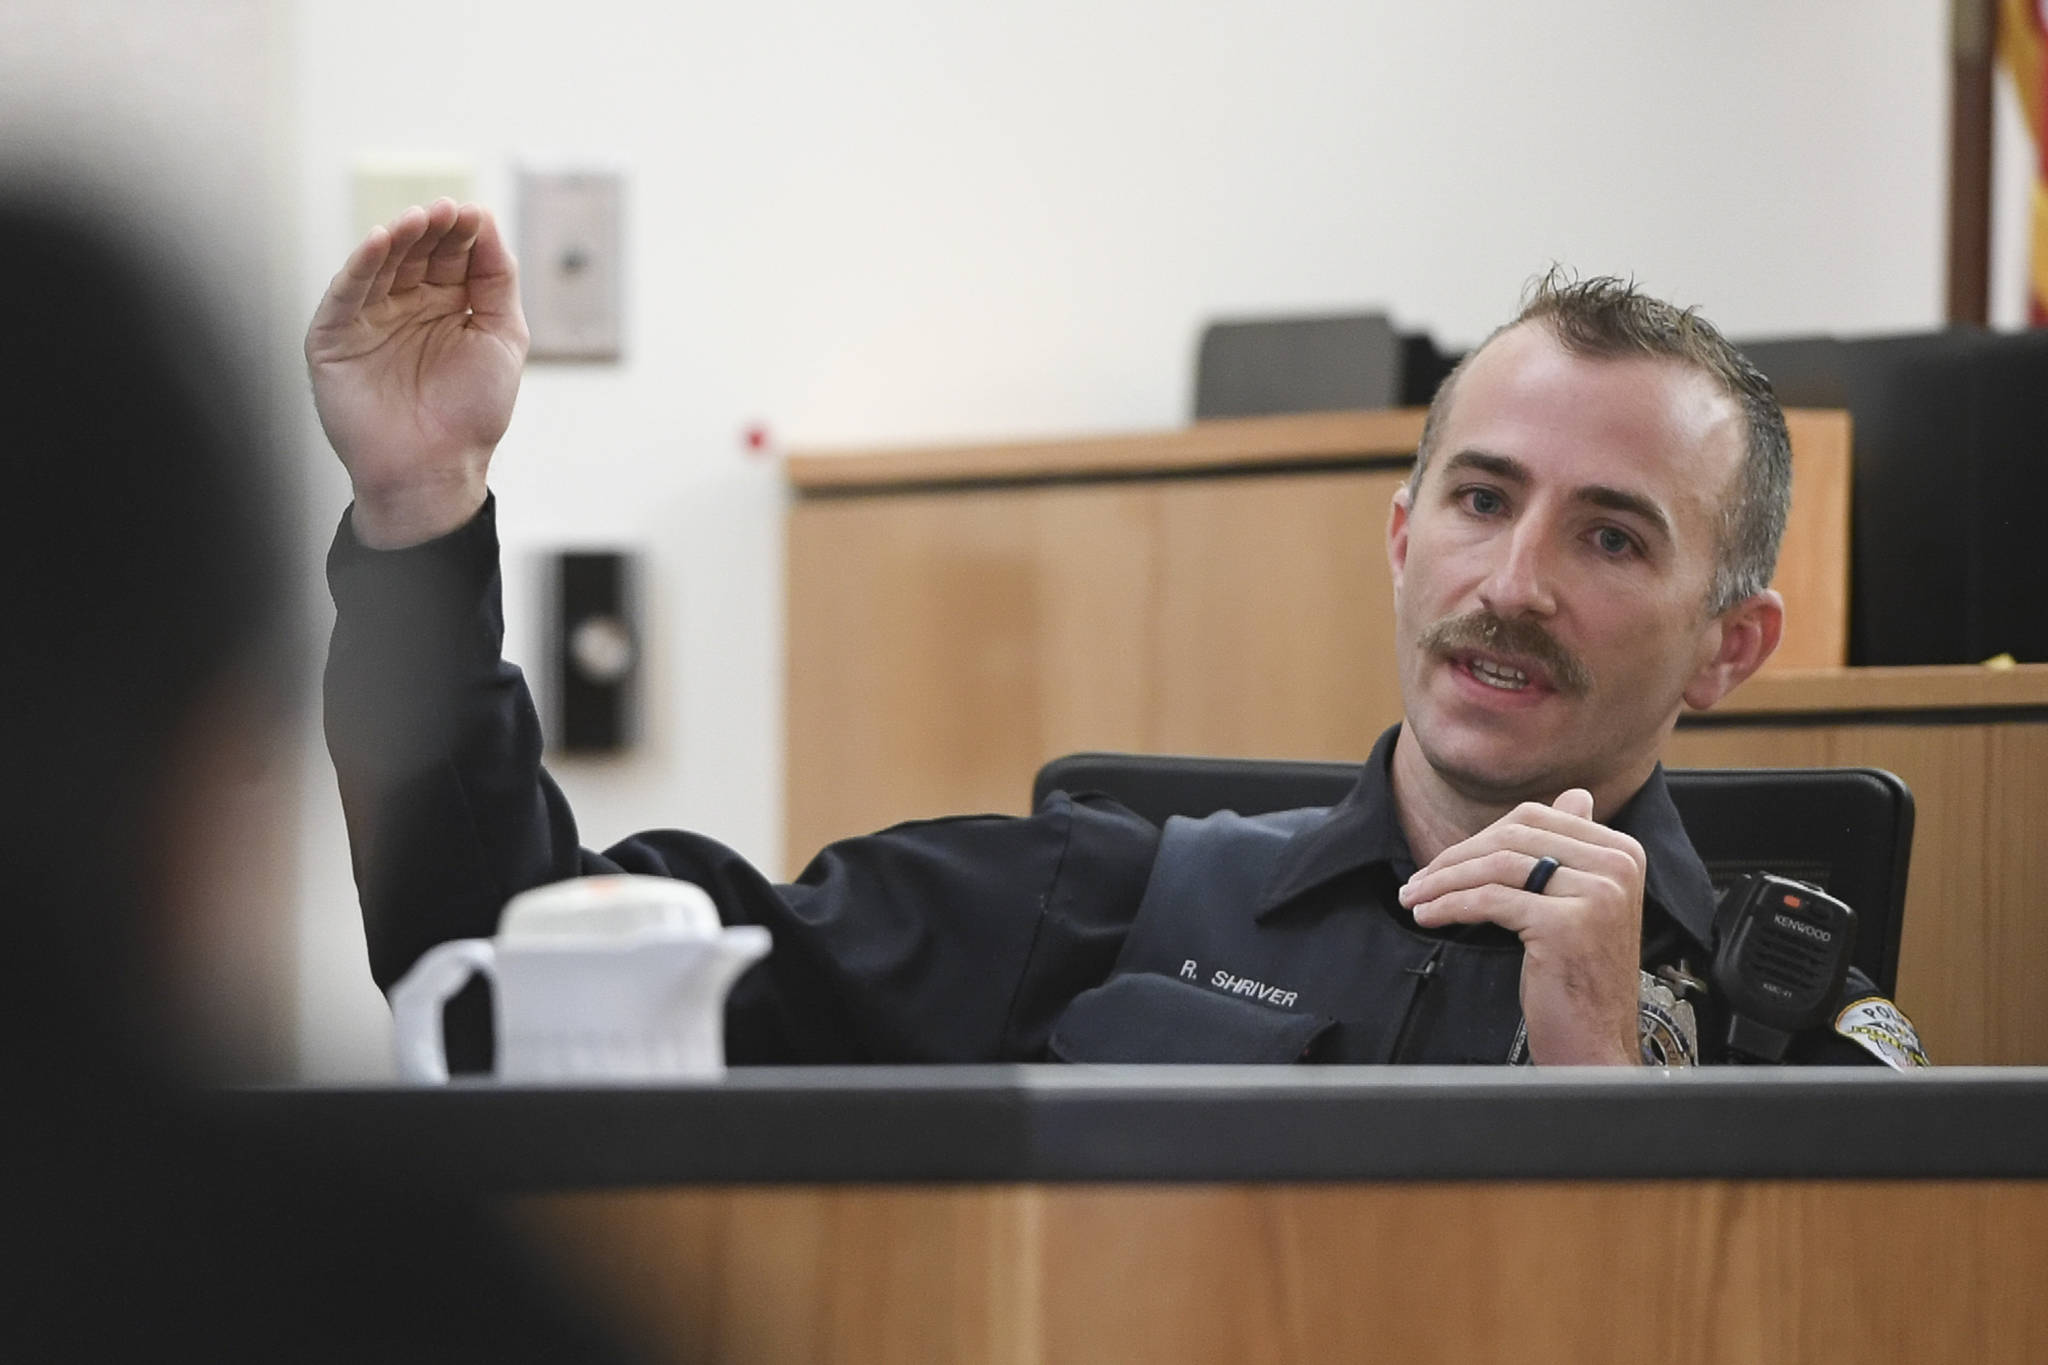 Juneau Police Department Officer Ronald Shriver answers questions on the witness stand from defense attorney Natasha Norris in Juneau Superior Court on Tuesday, Sept. 24, 2019, during Graham’s trial. Graham is facing two counts of first-degree murder for the November 2015 shooting deaths of 36-year-old Robert H. Meireis and 34-year-old Elizabeth K. Tonsmeire. Shriver was a Department of Corrections officer working at Lemon Creek Correctional Center when Graham was housed there in 2016. (Michael Penn | Juneau Empire)